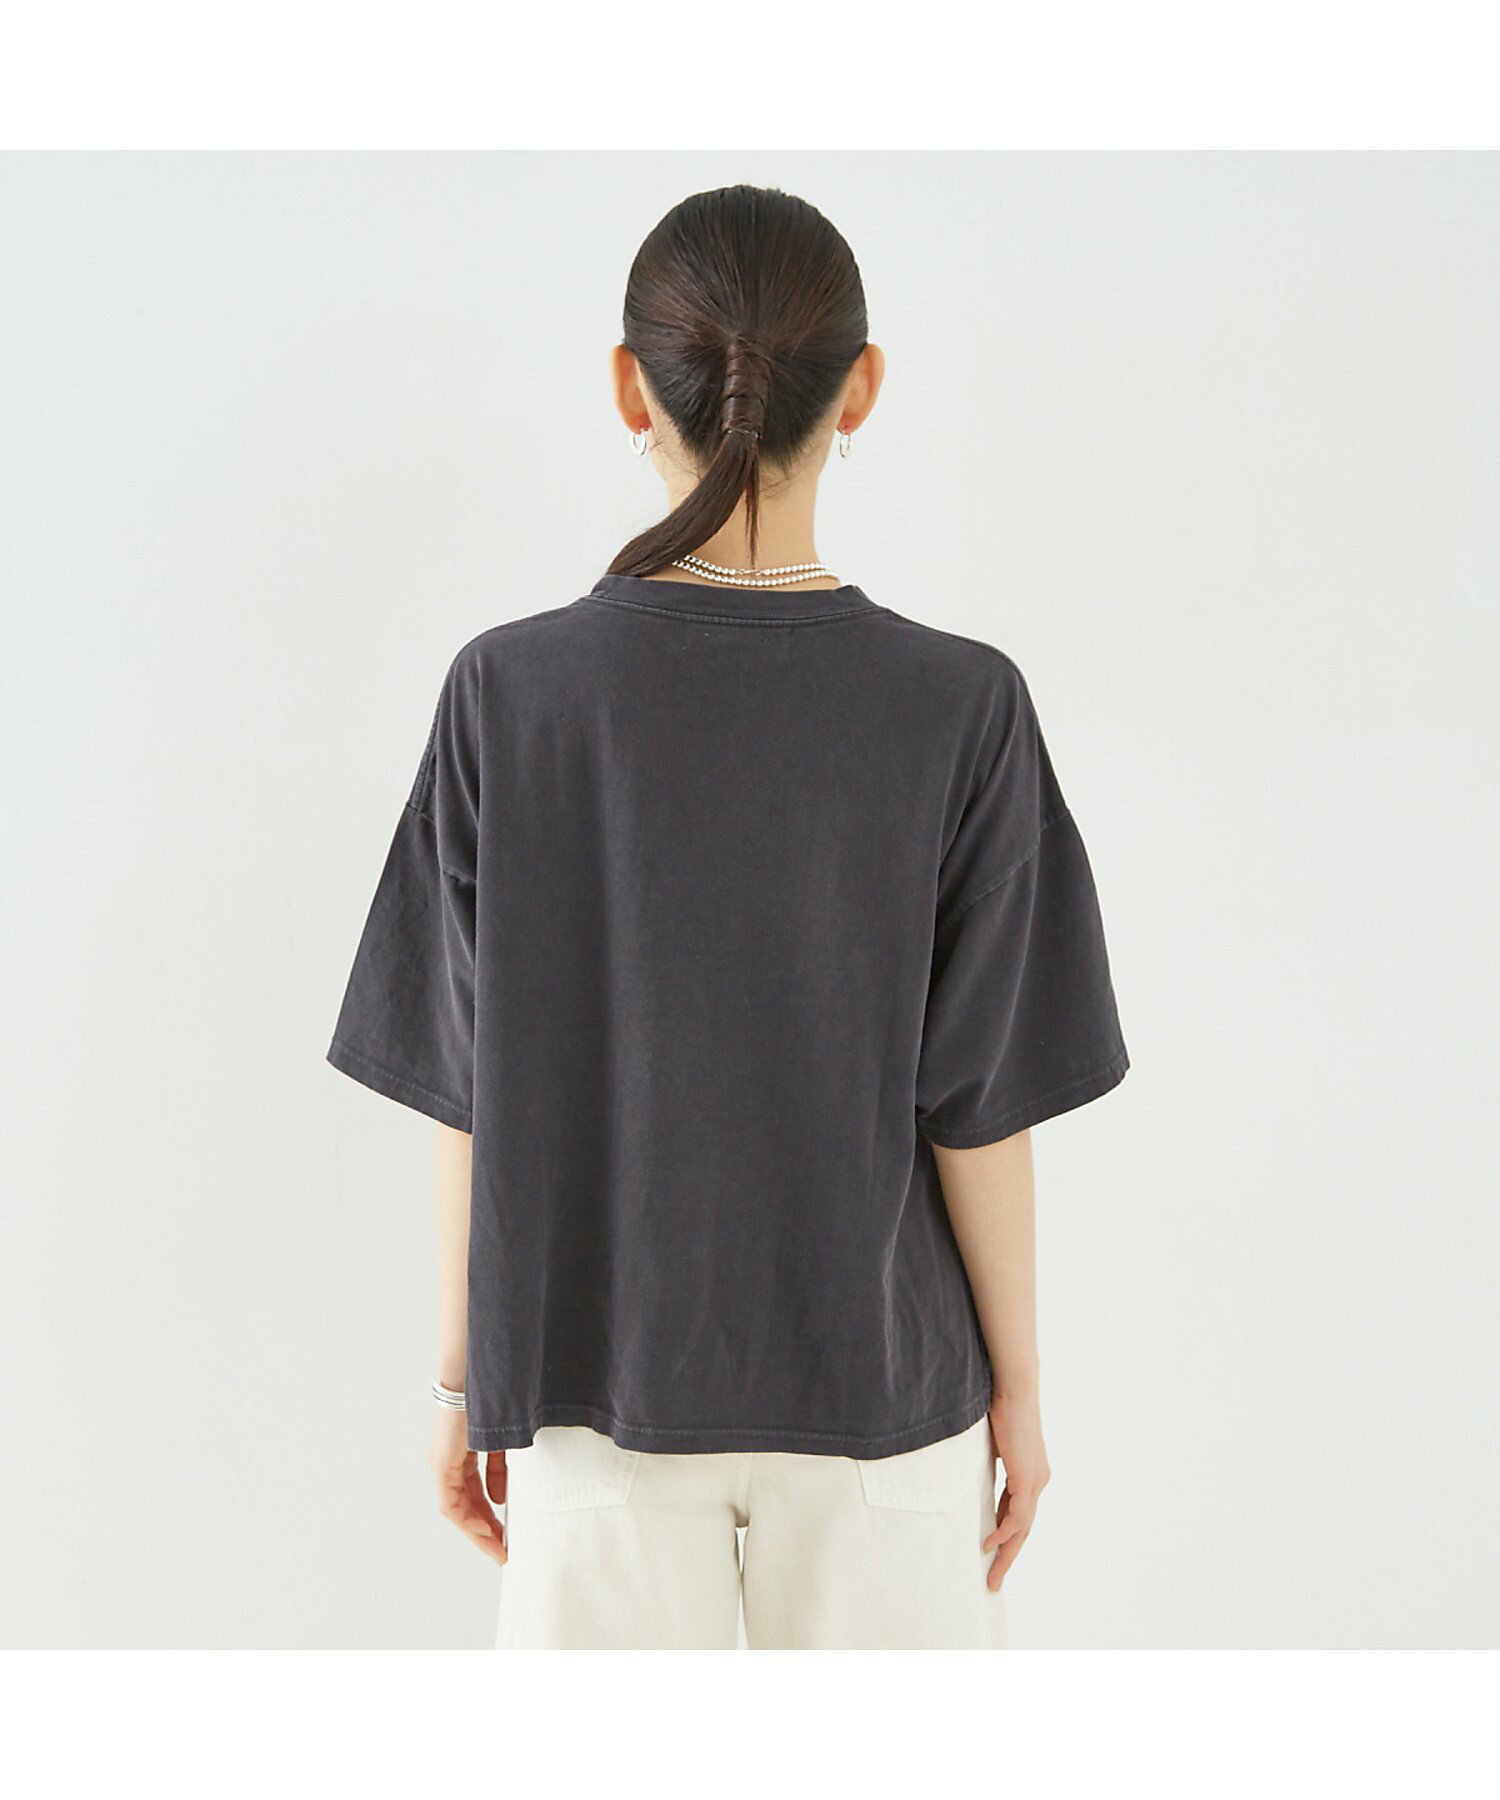 【REMI RELIEF/レミレリーフ】別注 REIMS Tシャツ【予約】